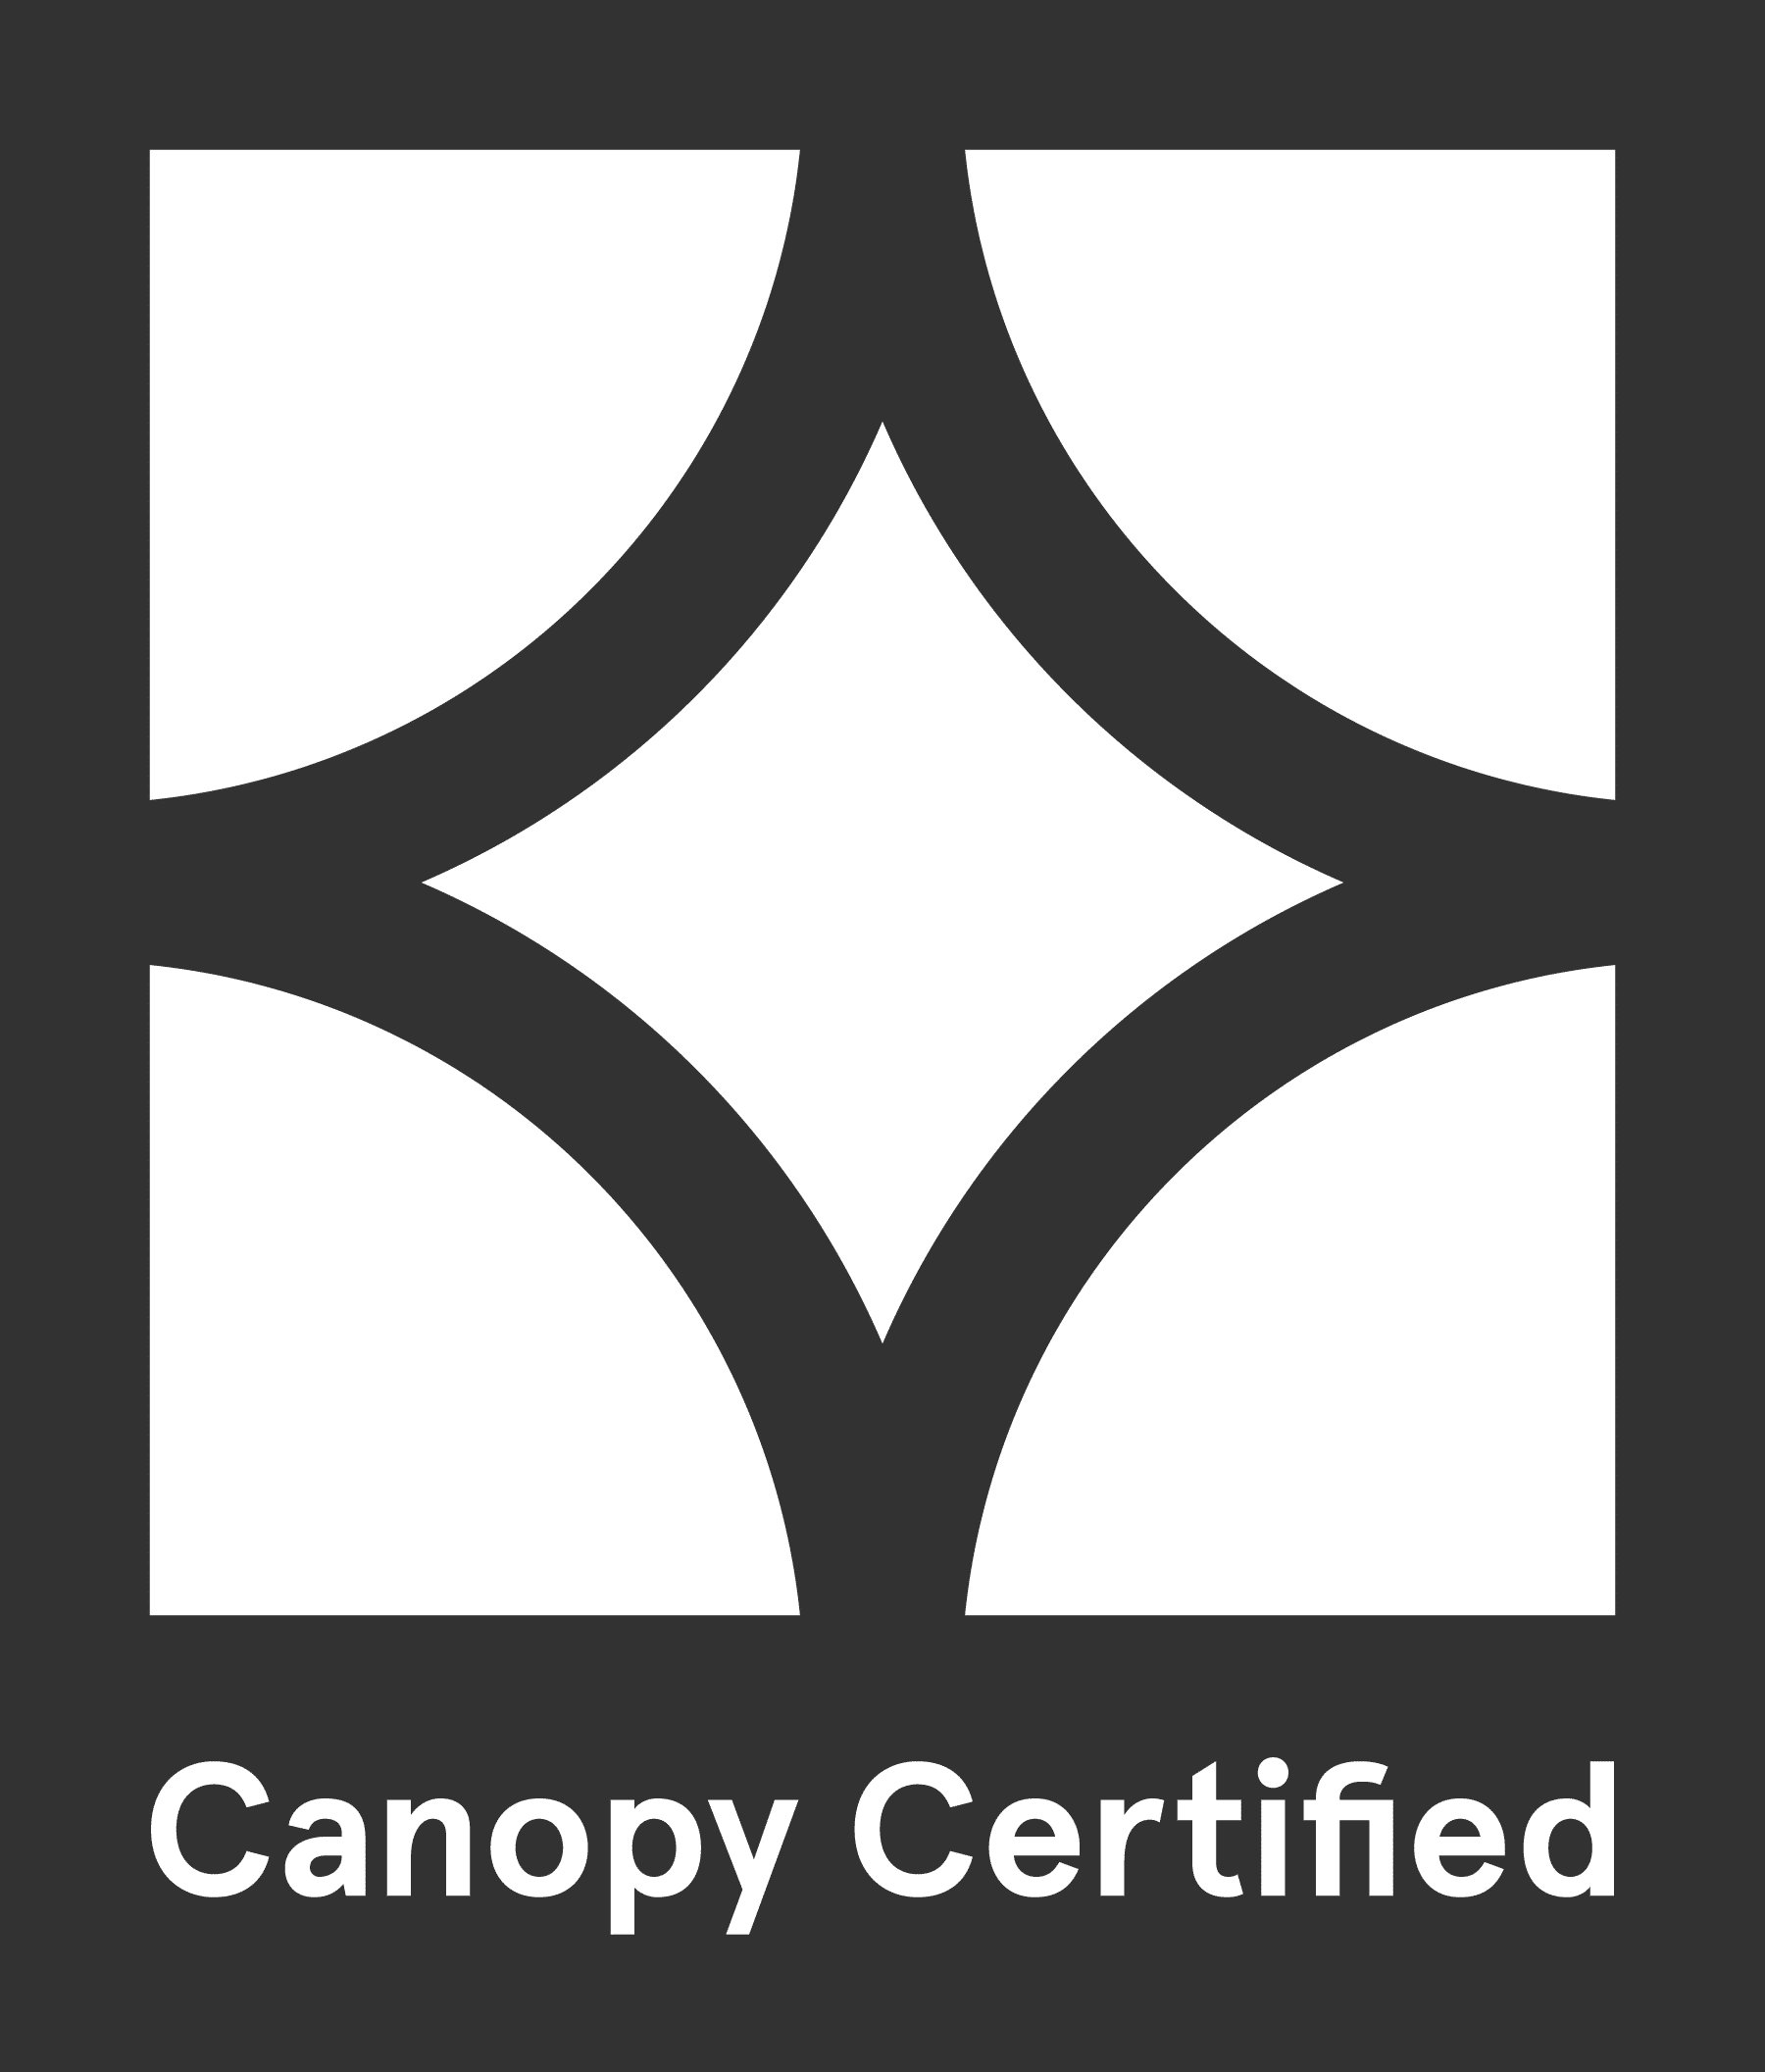 Canopy certification badge